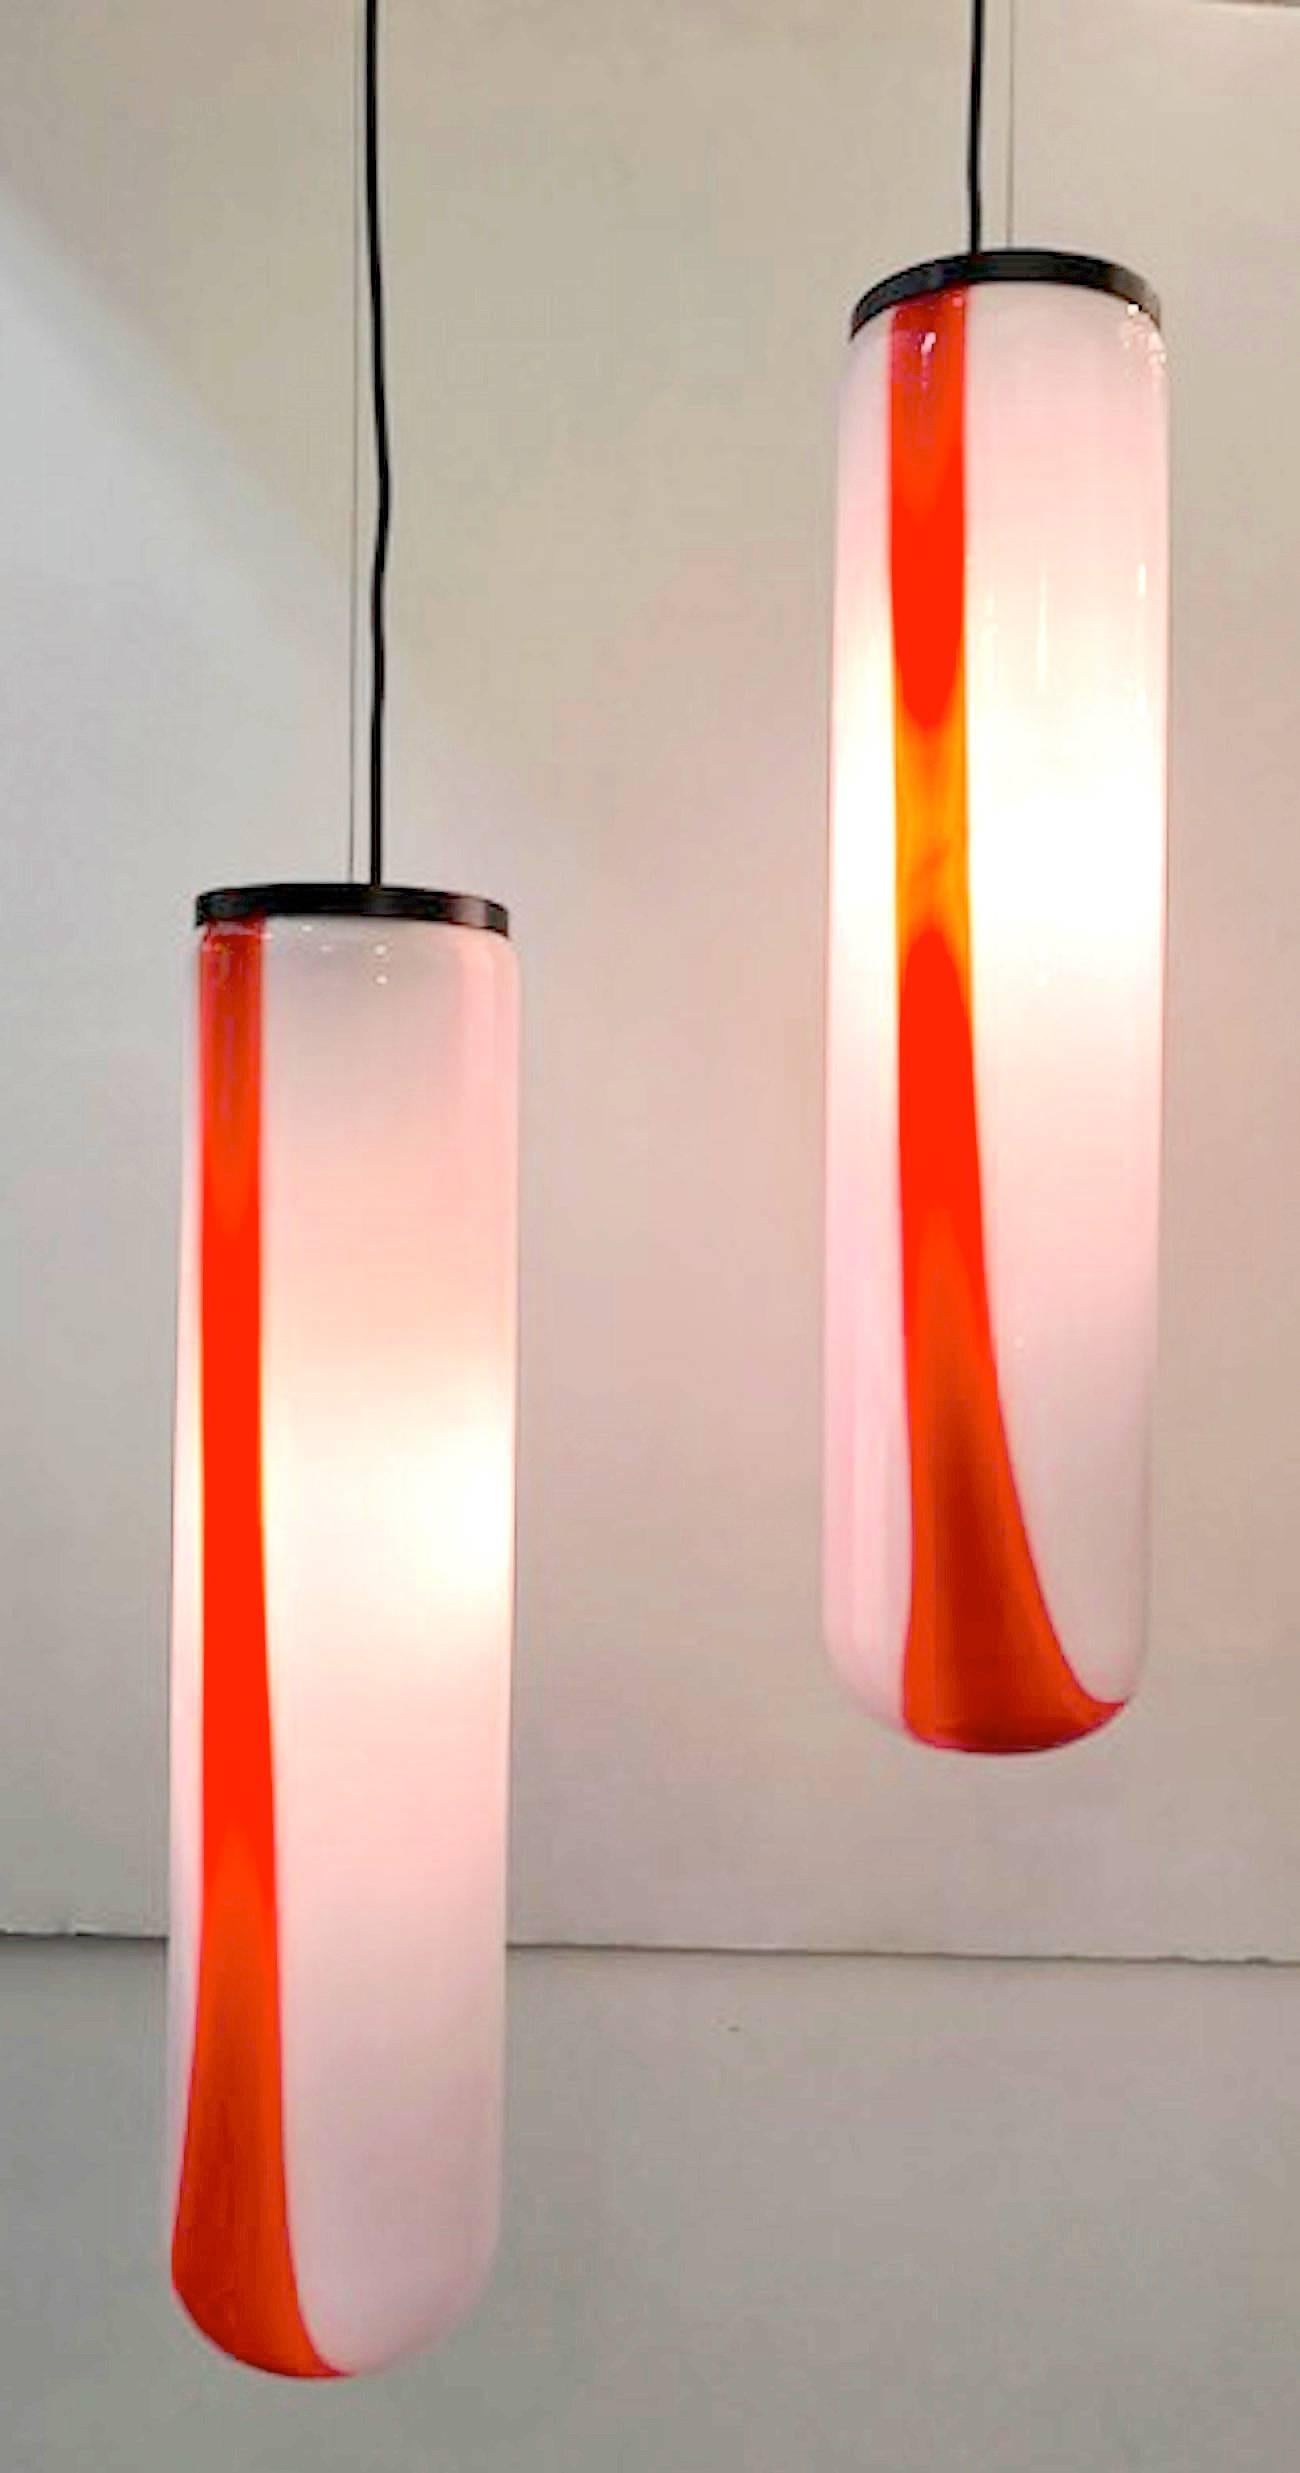 A wonderful and large Italian glass tube pendant lights, circa 1970 by Italian lighting company Vistosi of Murano. Originally a pair and now one available. The shade is uniquely handblown in white glass with a red and orange stripe. The red and